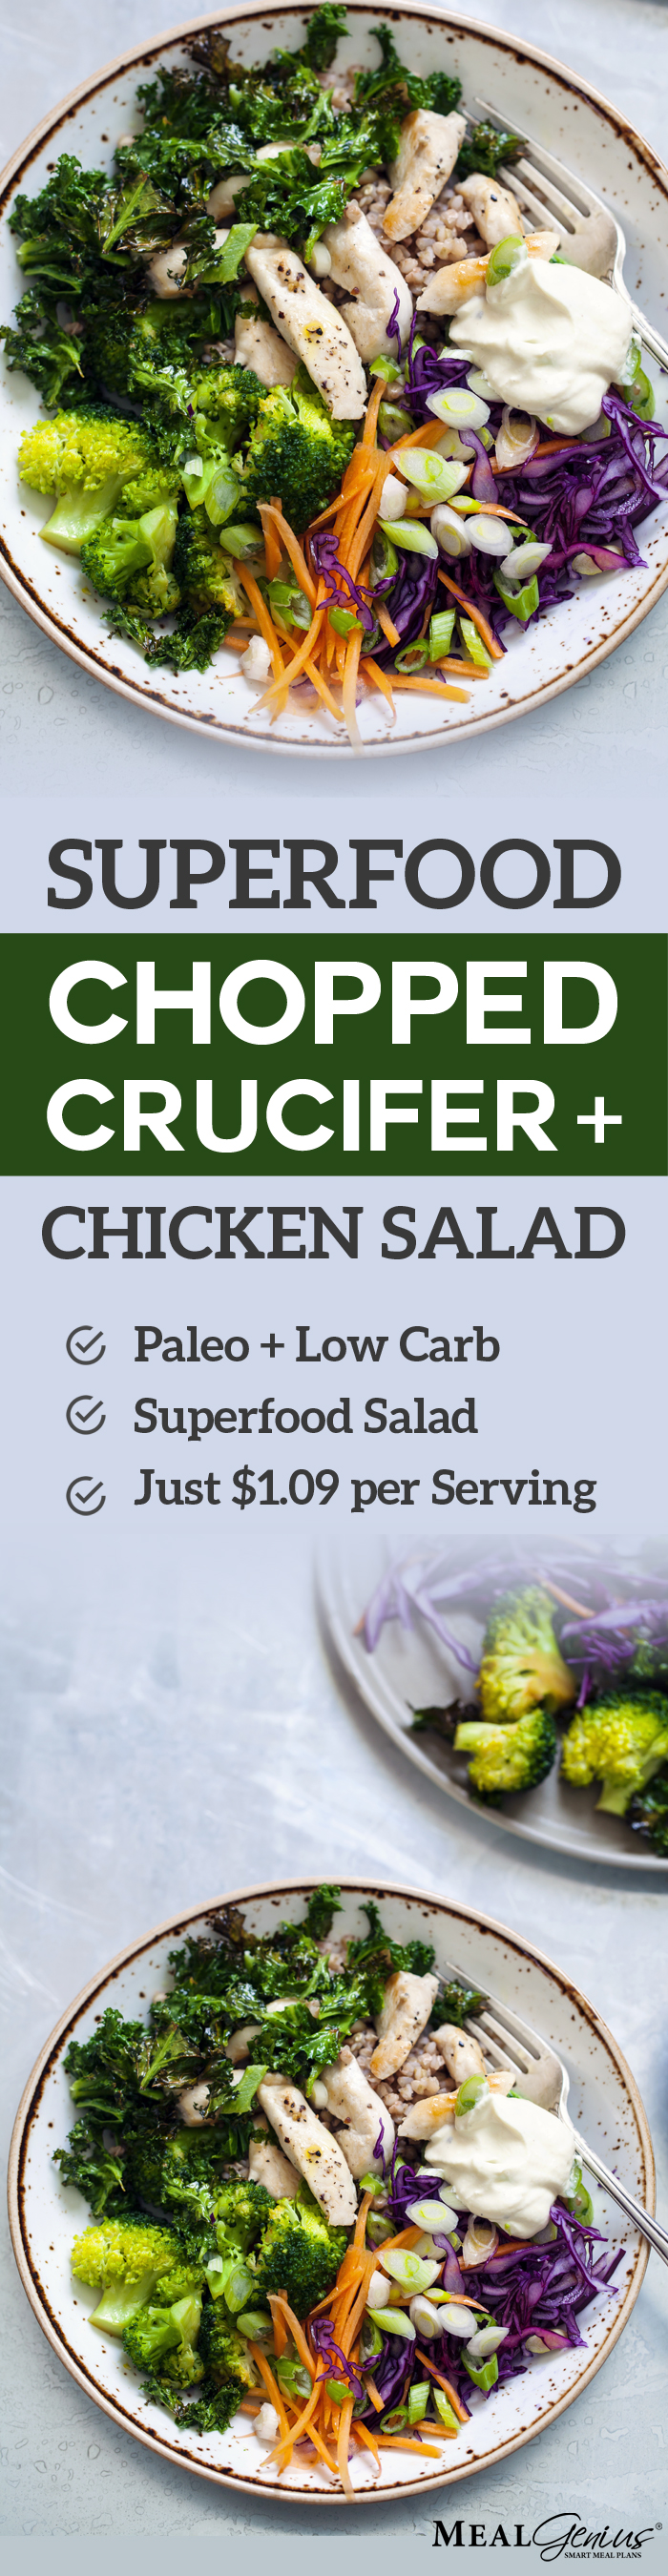 Superfood Chopped Salad with Chicken and Crucifers - Meal Genius